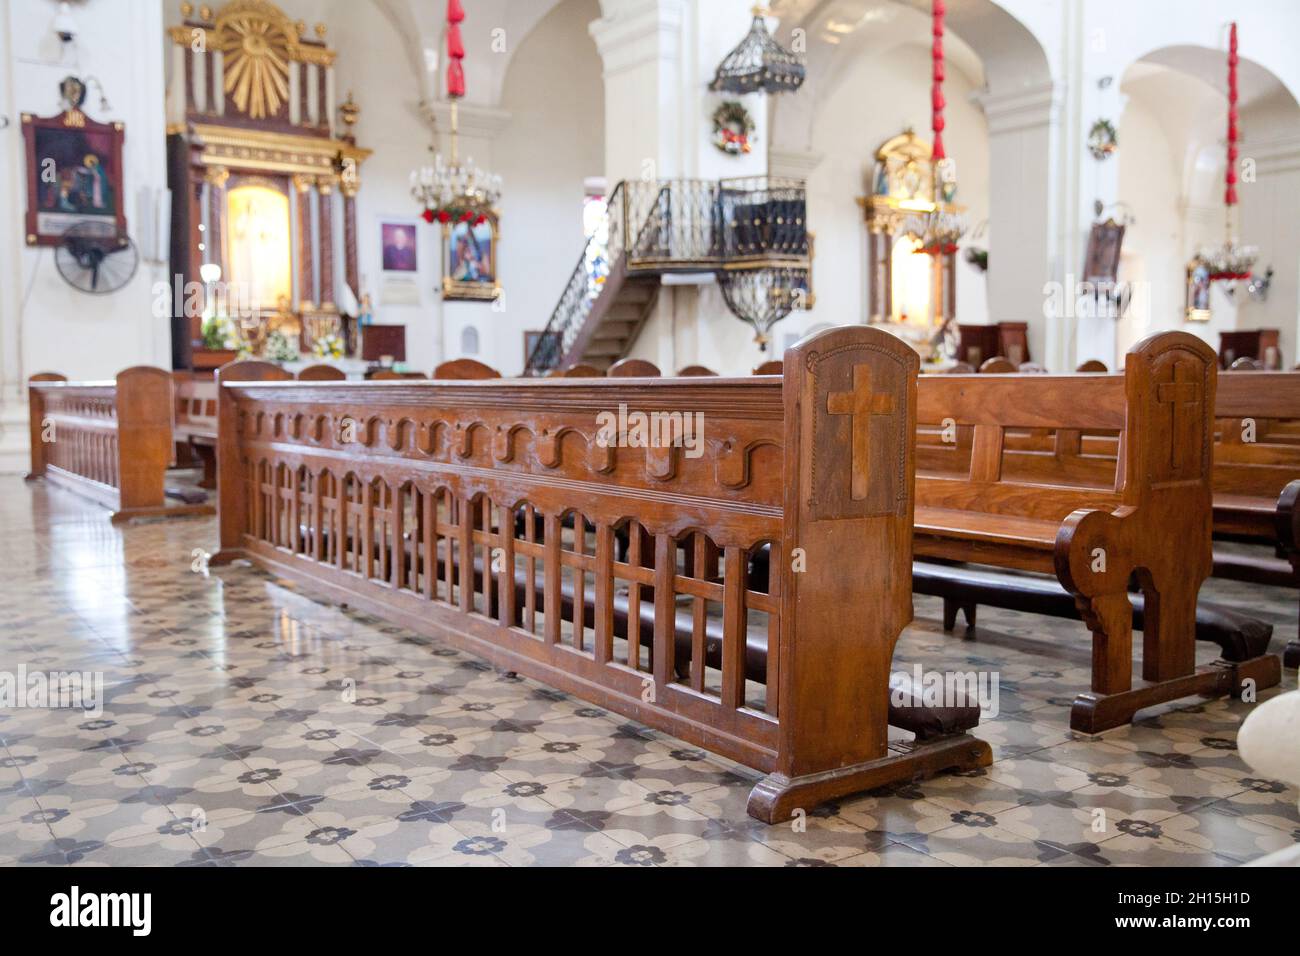 old wooden benches in the cathedral. The interior of the Philippine church. Stock Photo